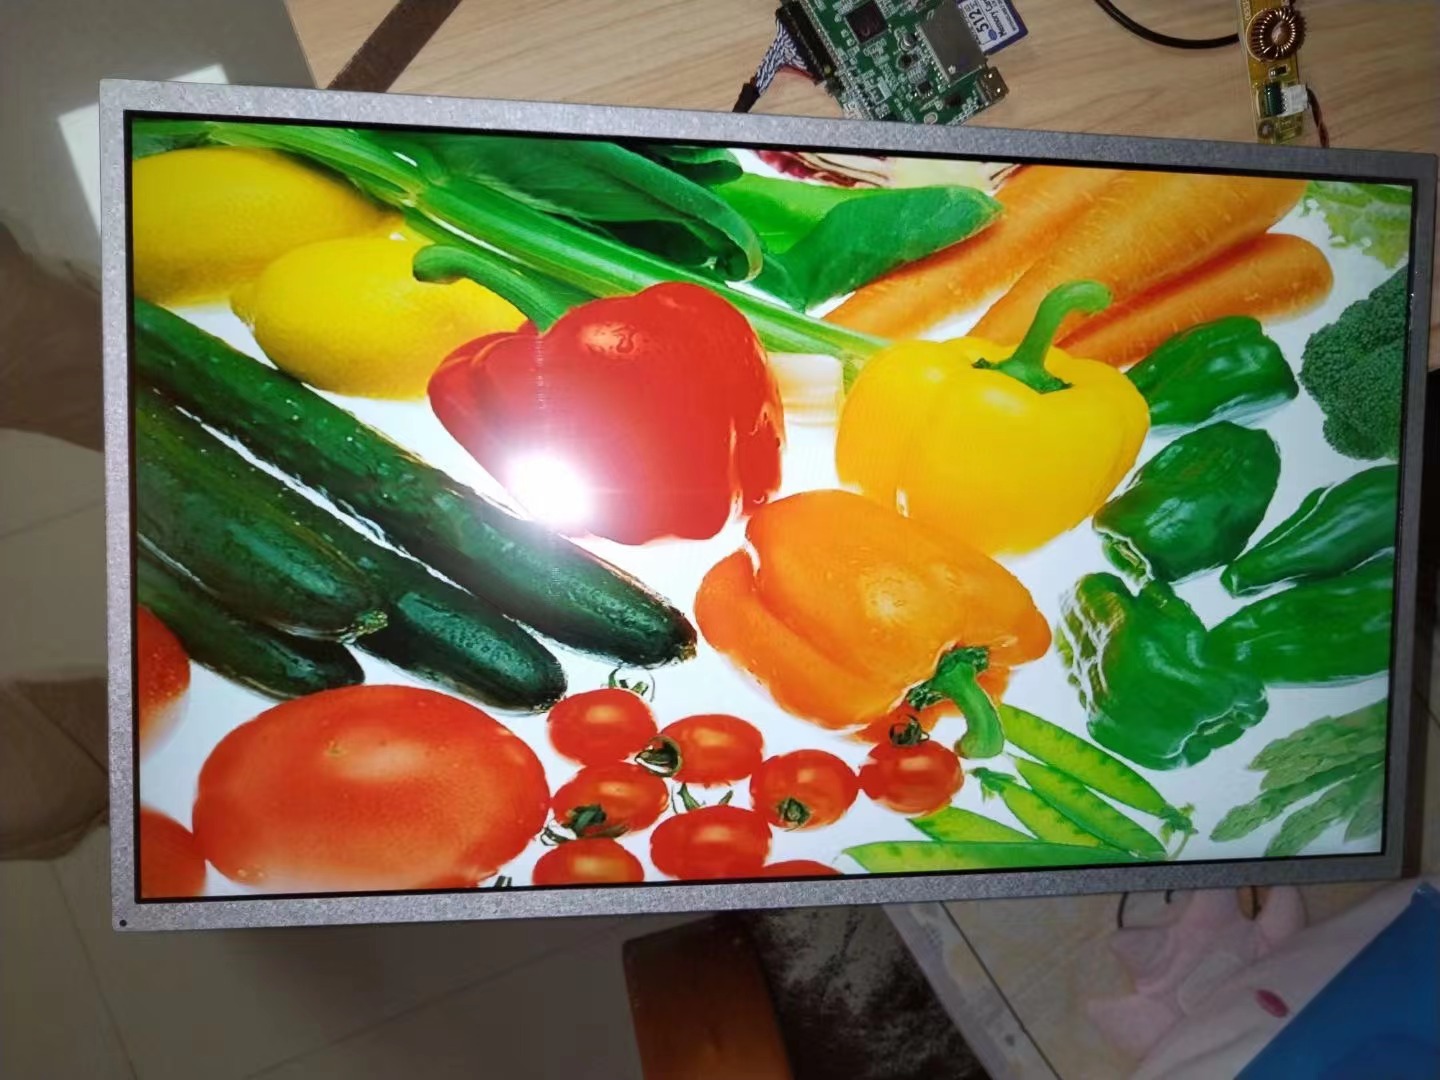 Title: New 21.5-Inch IPS LCD Display: Perfect Specifications to Satisfy Customers